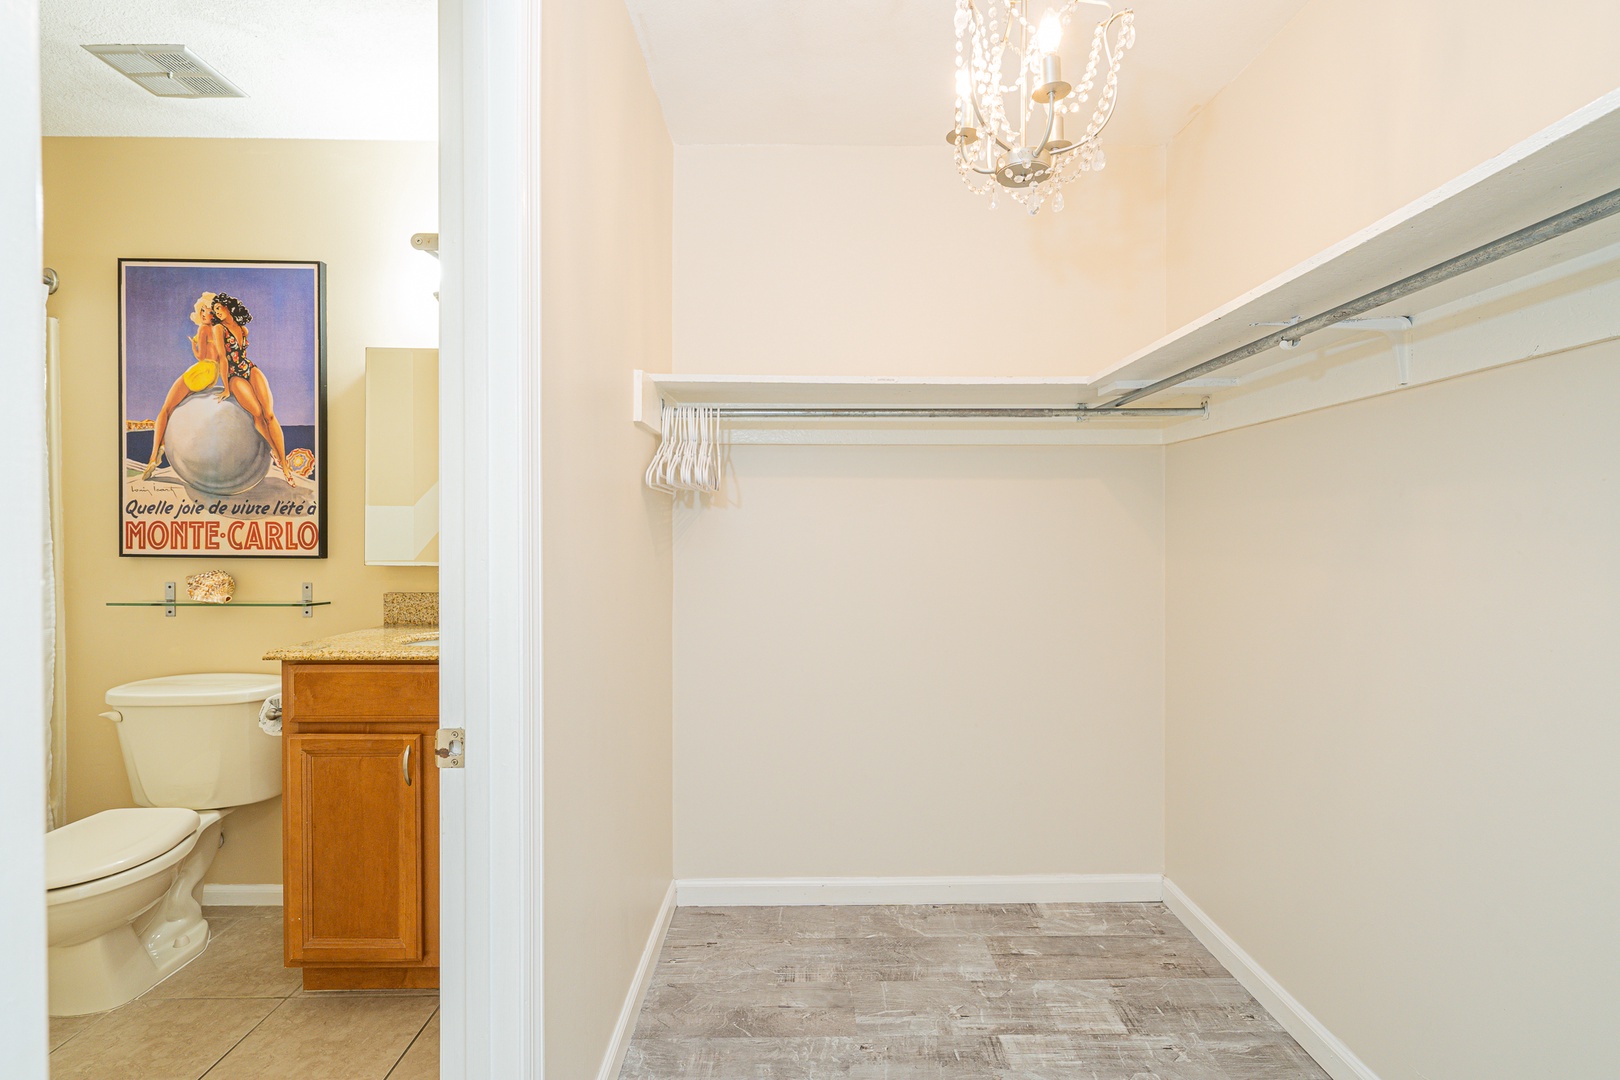 The final queen suite offers a walk-in closet, private ensuite. & Smart TV